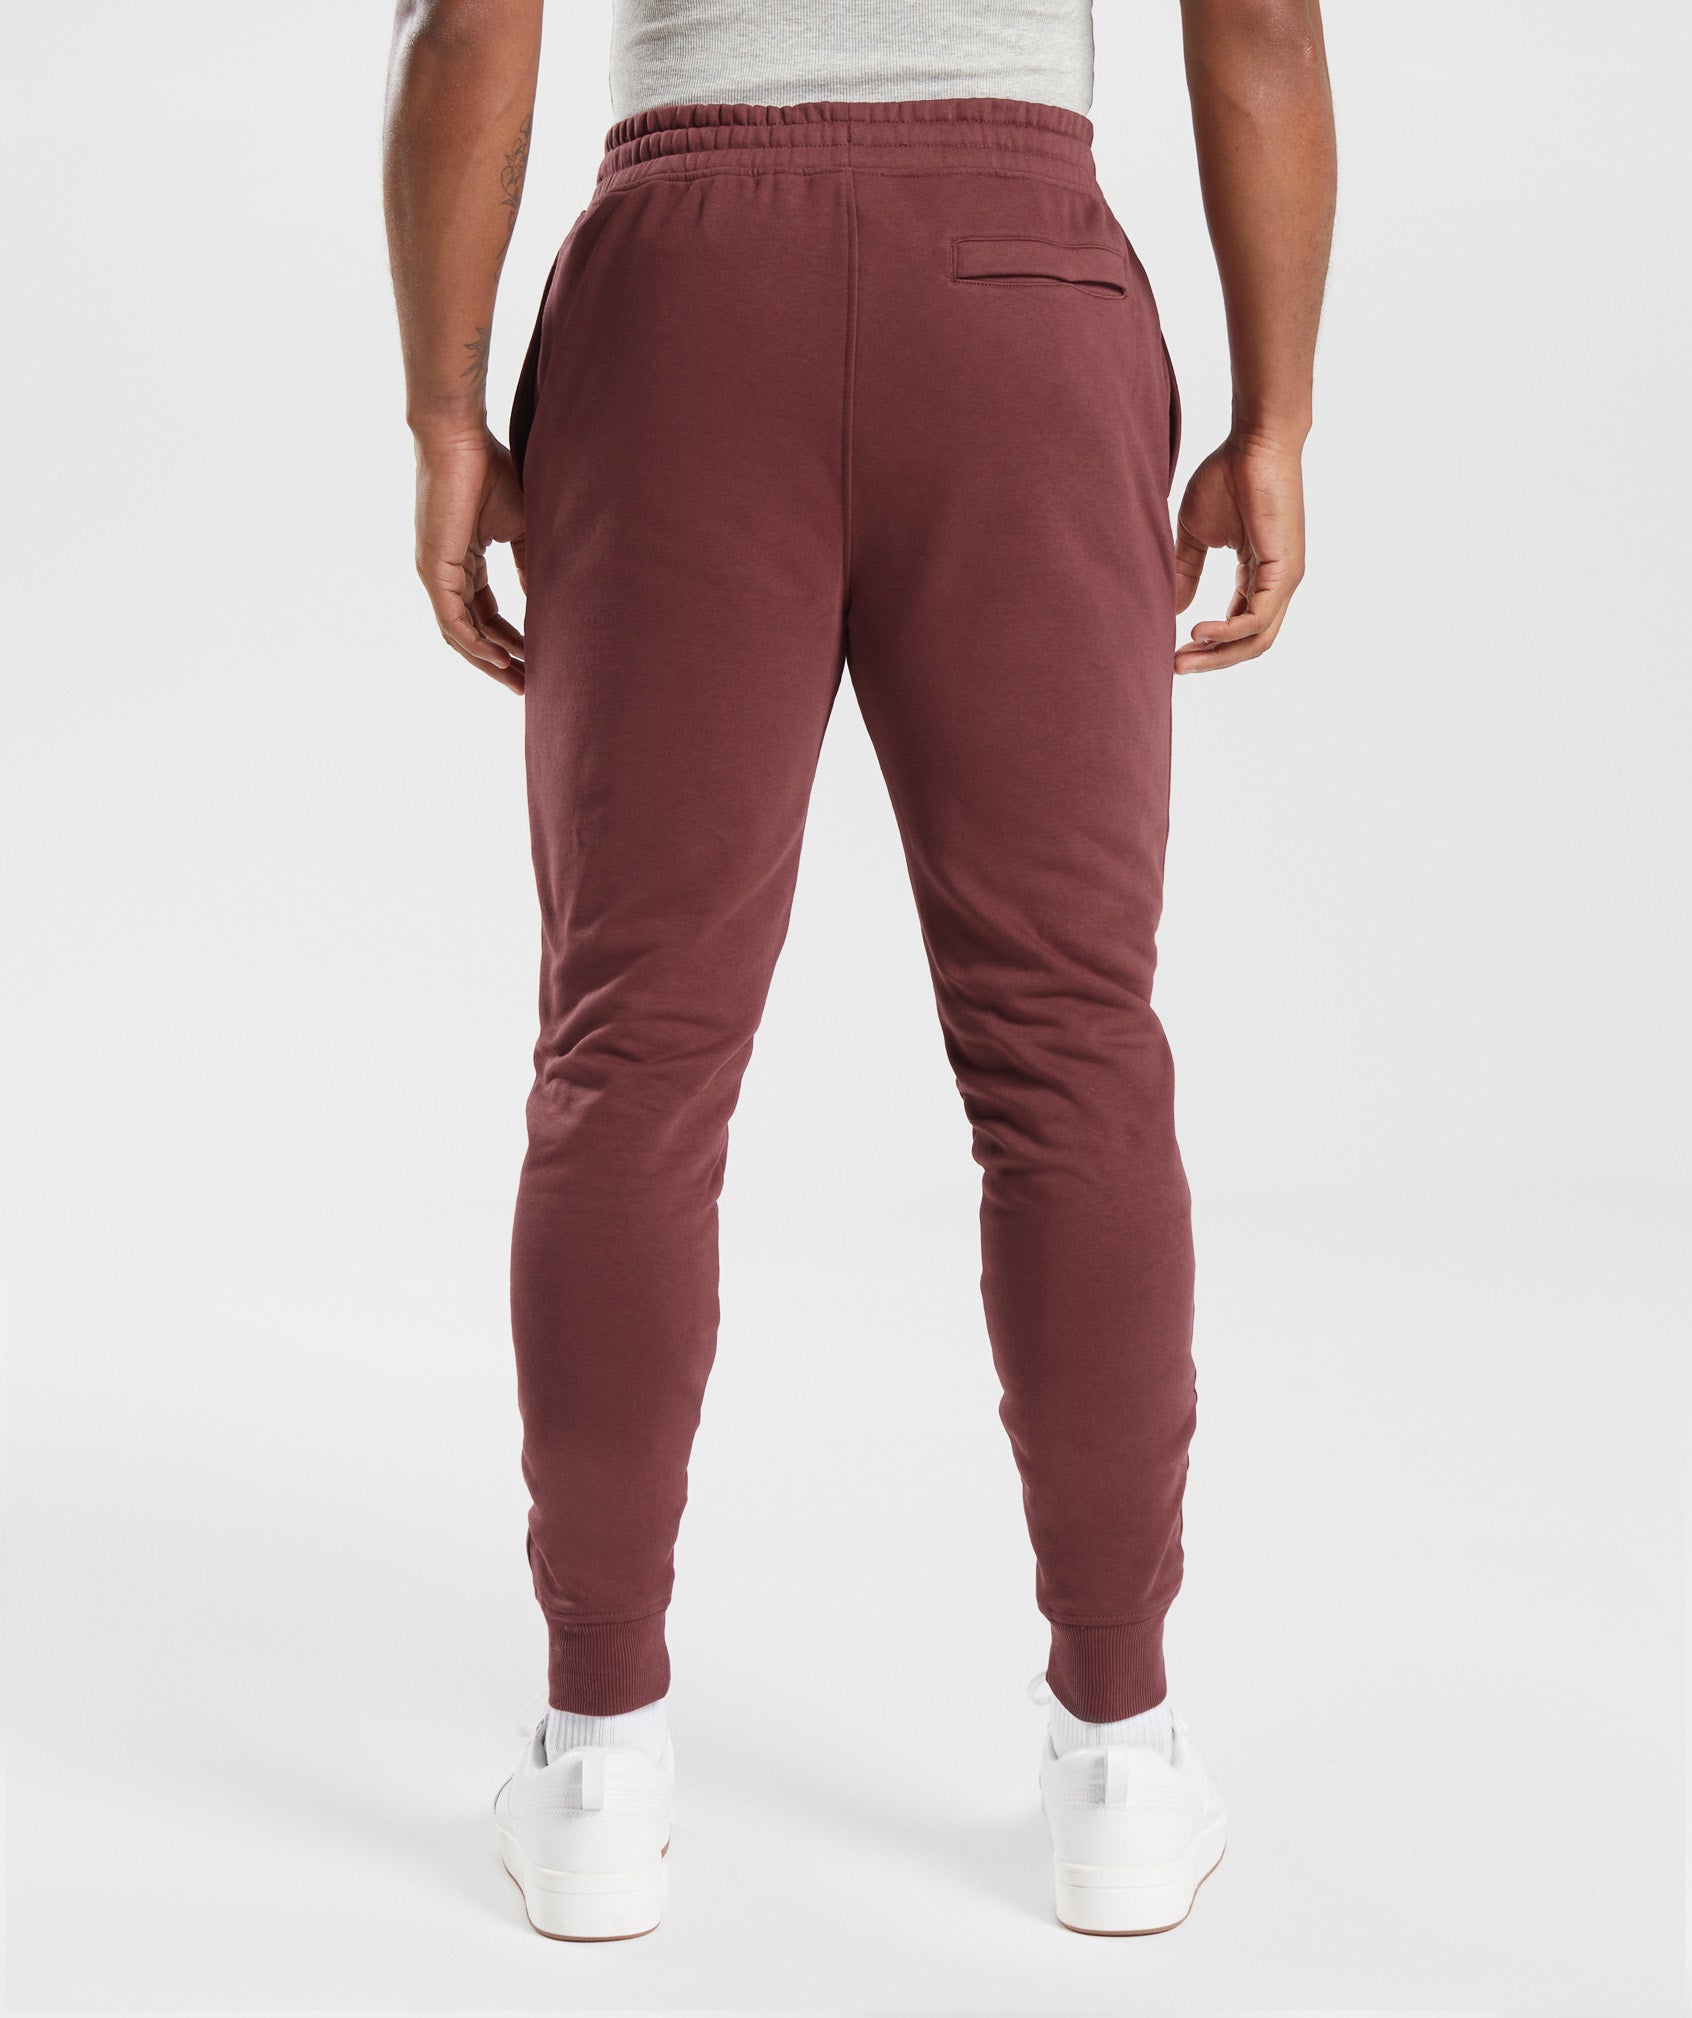 Gymshark Crest Joggers - Truffle Brown